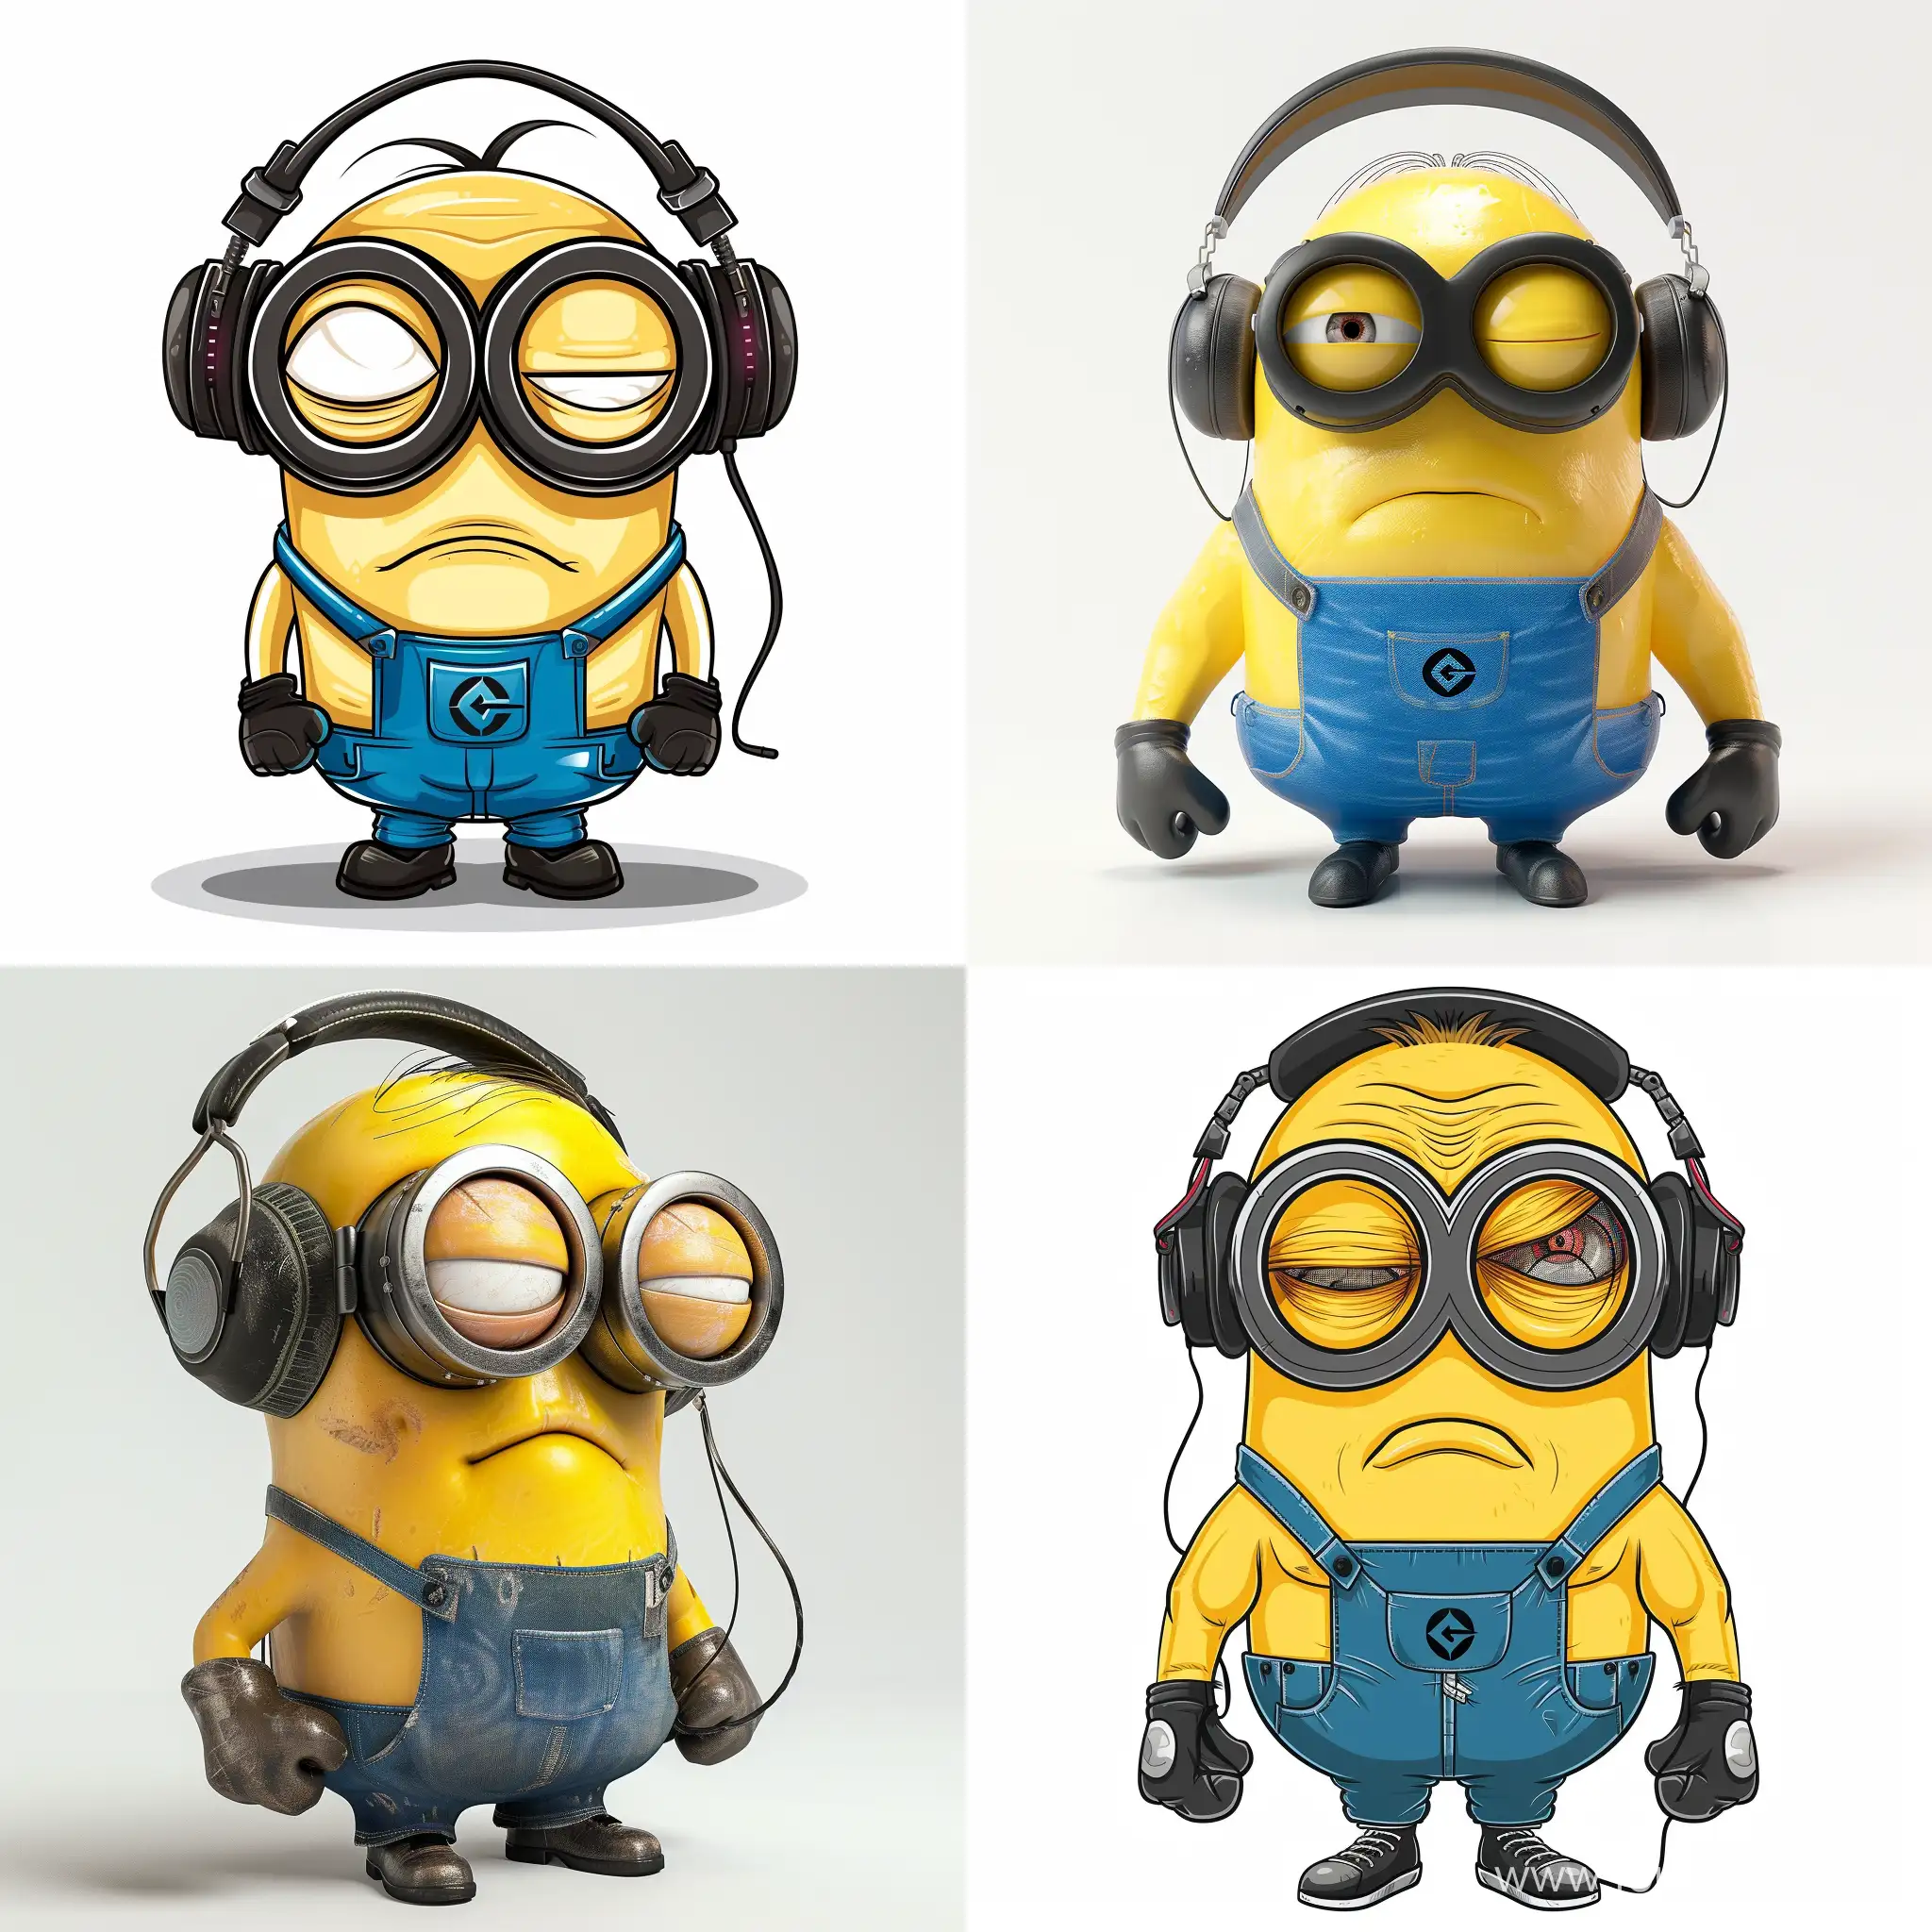 Gamer-Minion-with-Headphones-Playful-Character-in-Digital-World